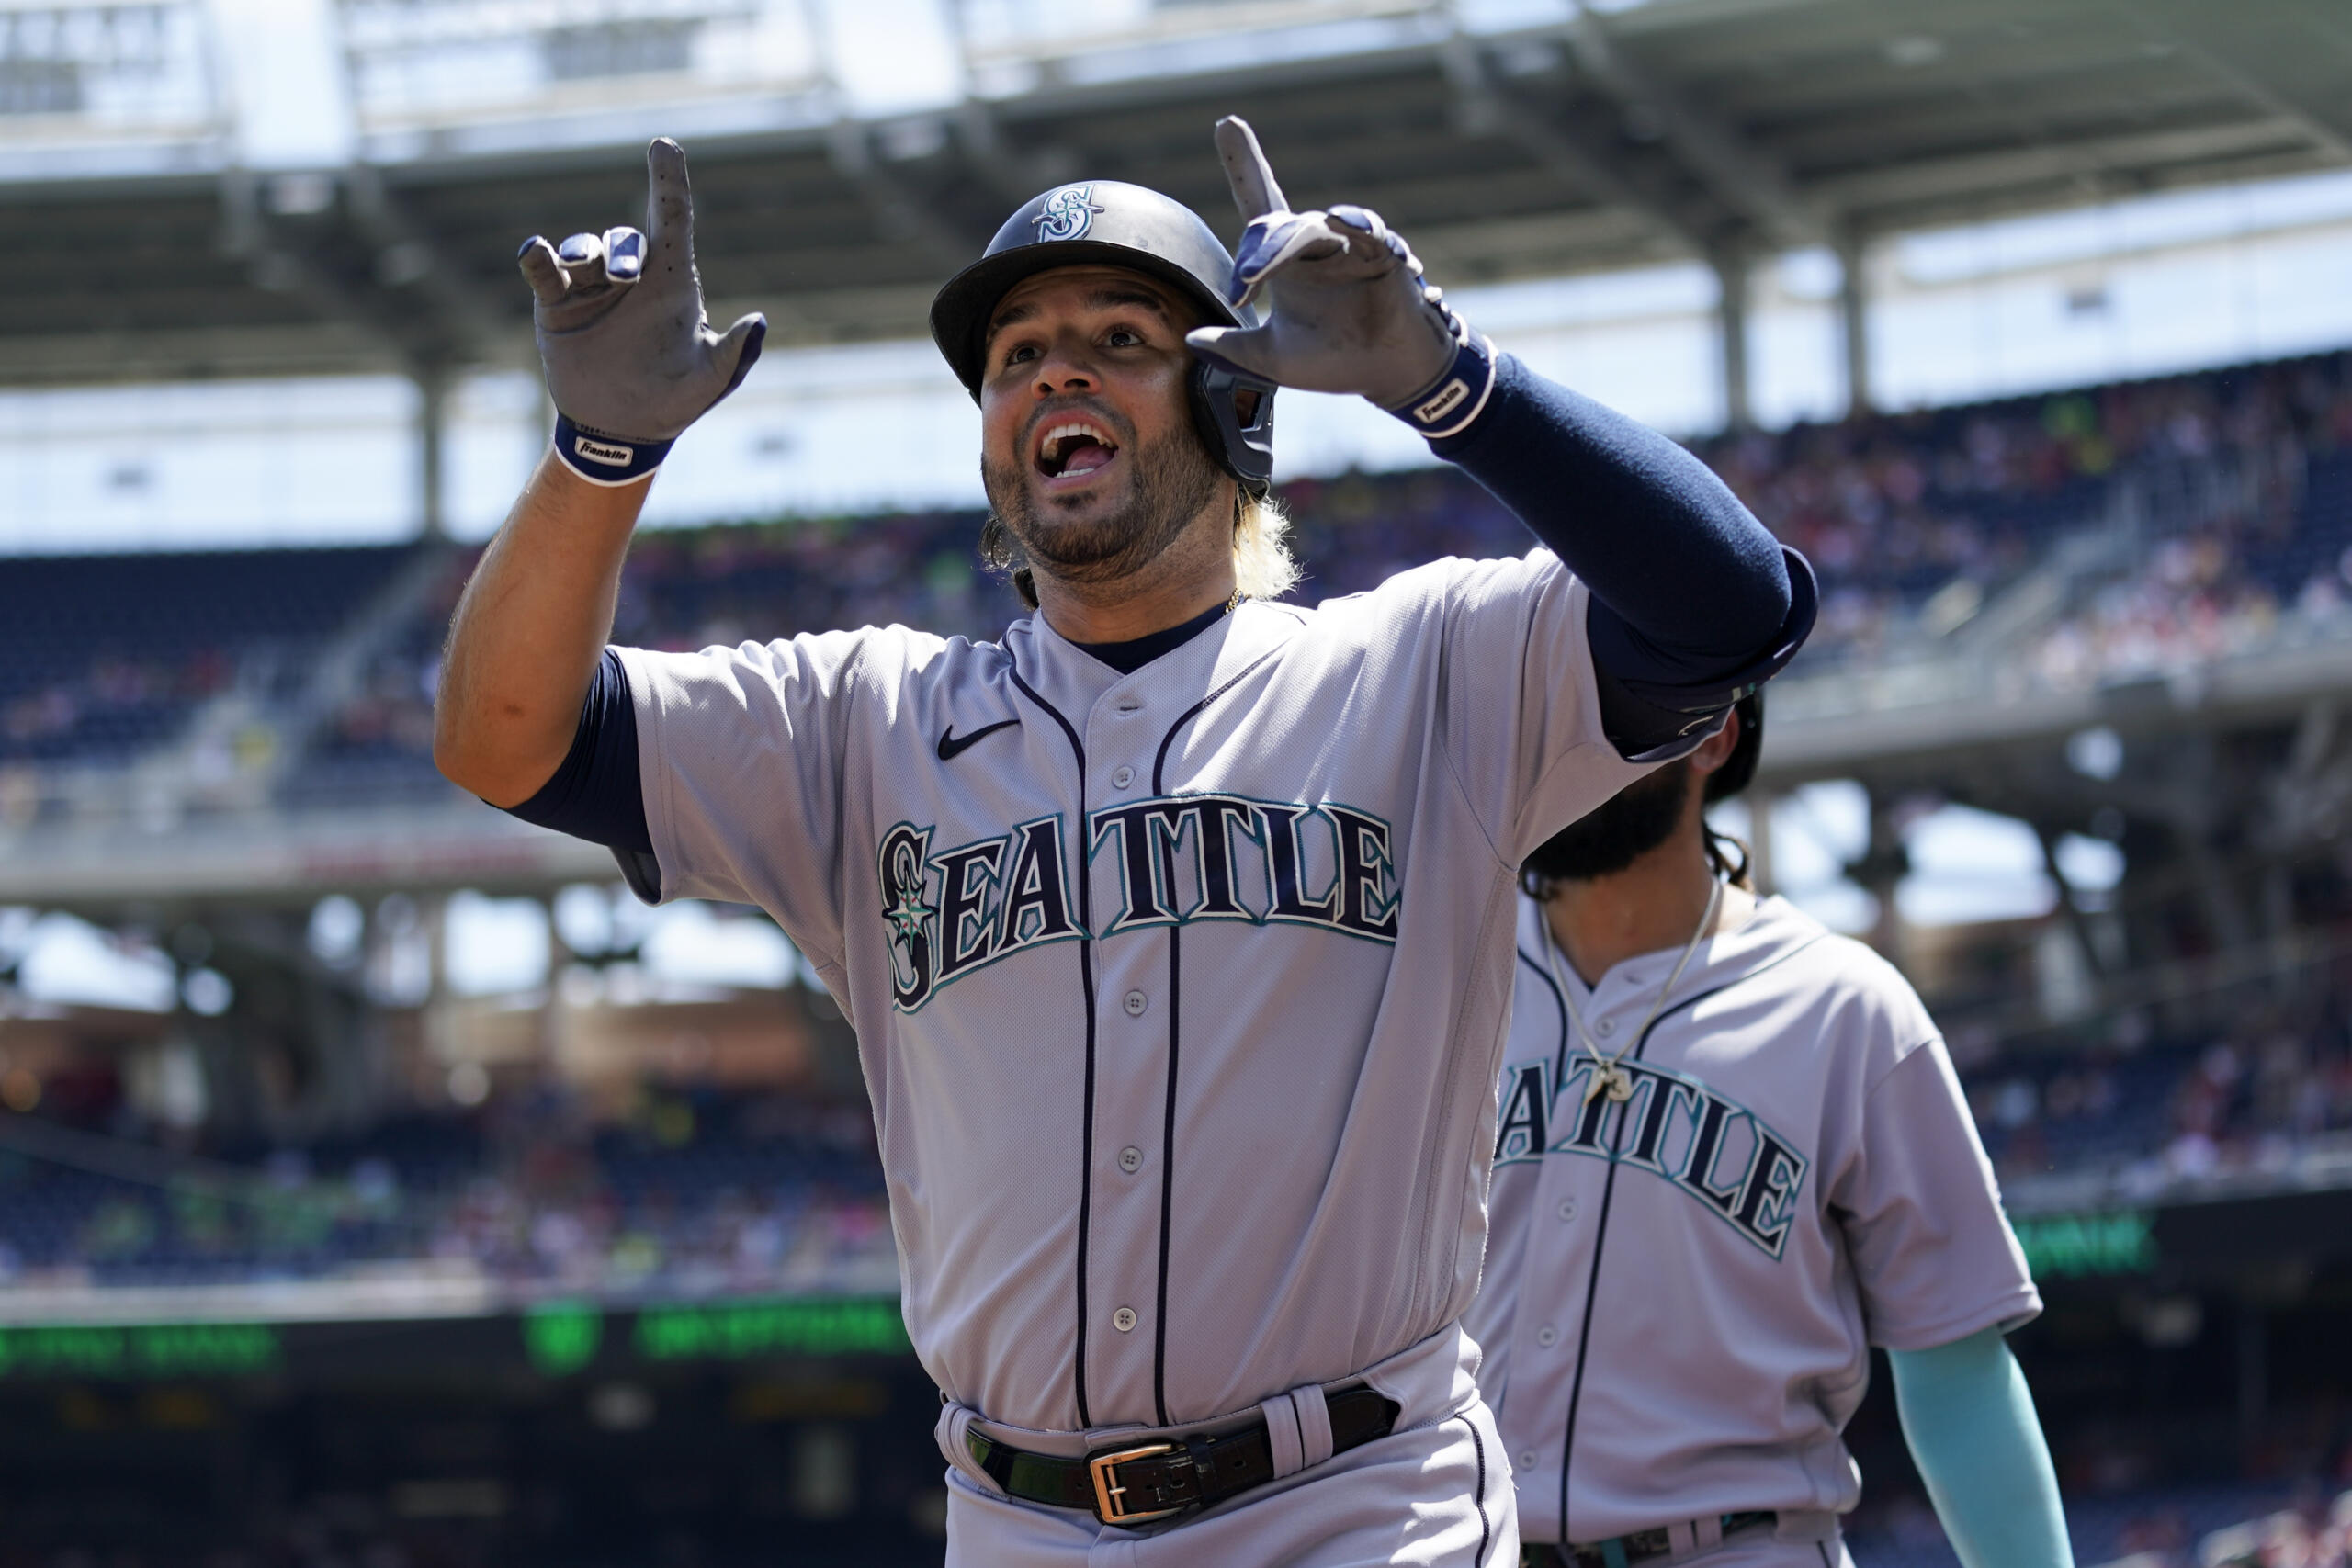 Seattle Mariners' Eugenio Suarez reacts after hitting a three-run home run in the first inning of the first game of a baseball doubleheader against the Washington Nationals, Wednesday, July 13, 2022, in Washington.